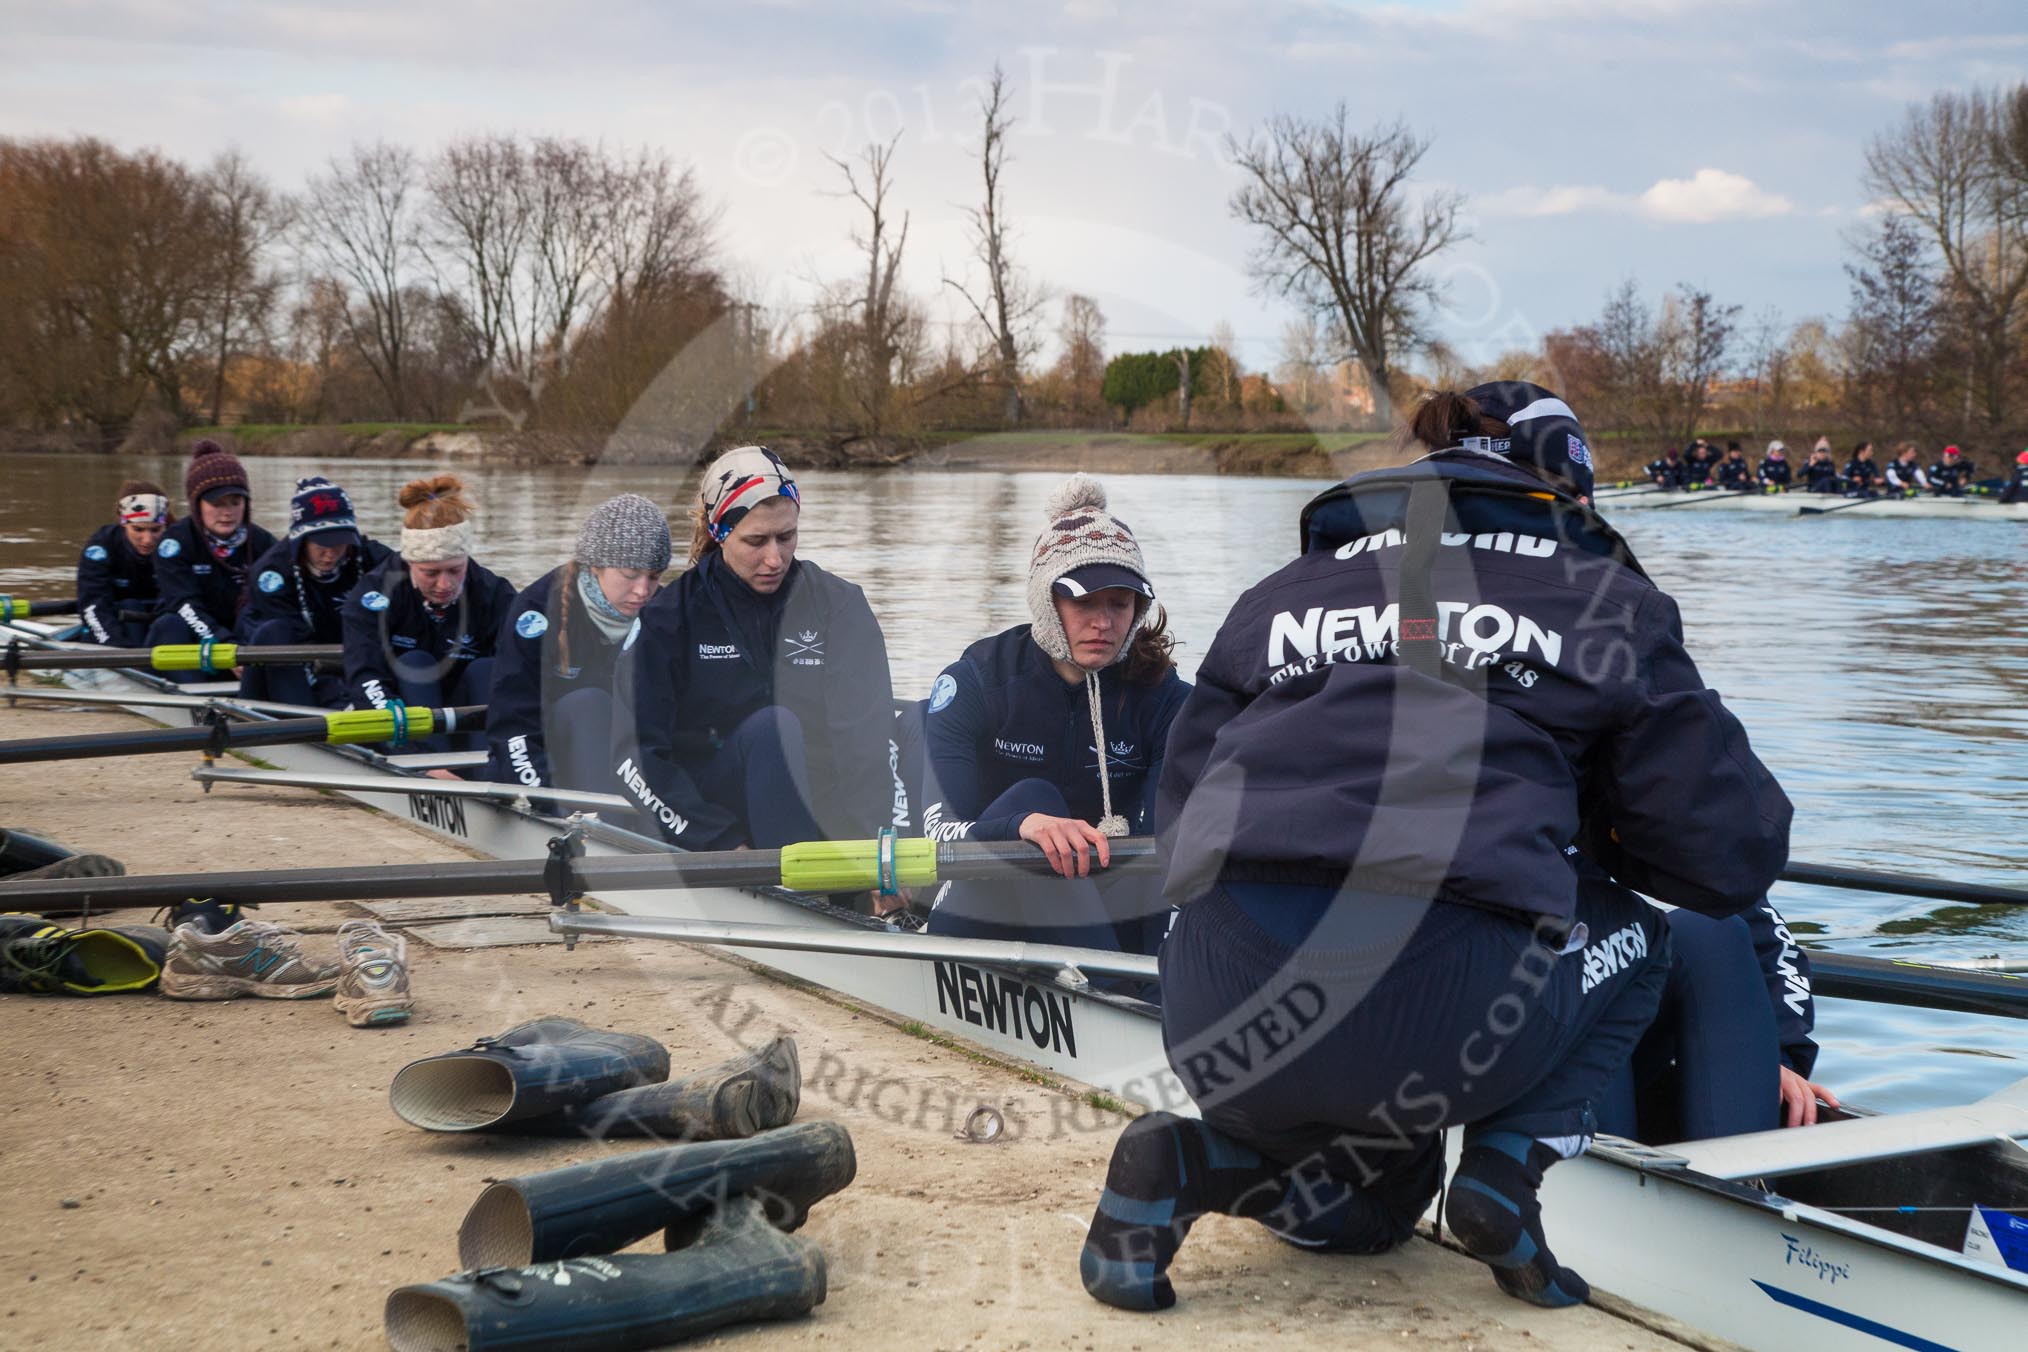 The Boat Race season 2013 - OUWBC training: The crew of Osiris, the OUWBC reserve boat, getting ready: Cox Sophie Shawdon, stroke Emily Chittock, then Annika Bruger, Caitlin Goss, Rachel Purkess, Eleanor Darlington, Hannah Ledbury, Elspeth Cumber,  and bow Coralie Viollet-Djelassi..
Fleming Boathouse,
Wallingford,
Oxfordshire,
United Kingdom,
on 13 March 2013 at 16:52, image #31